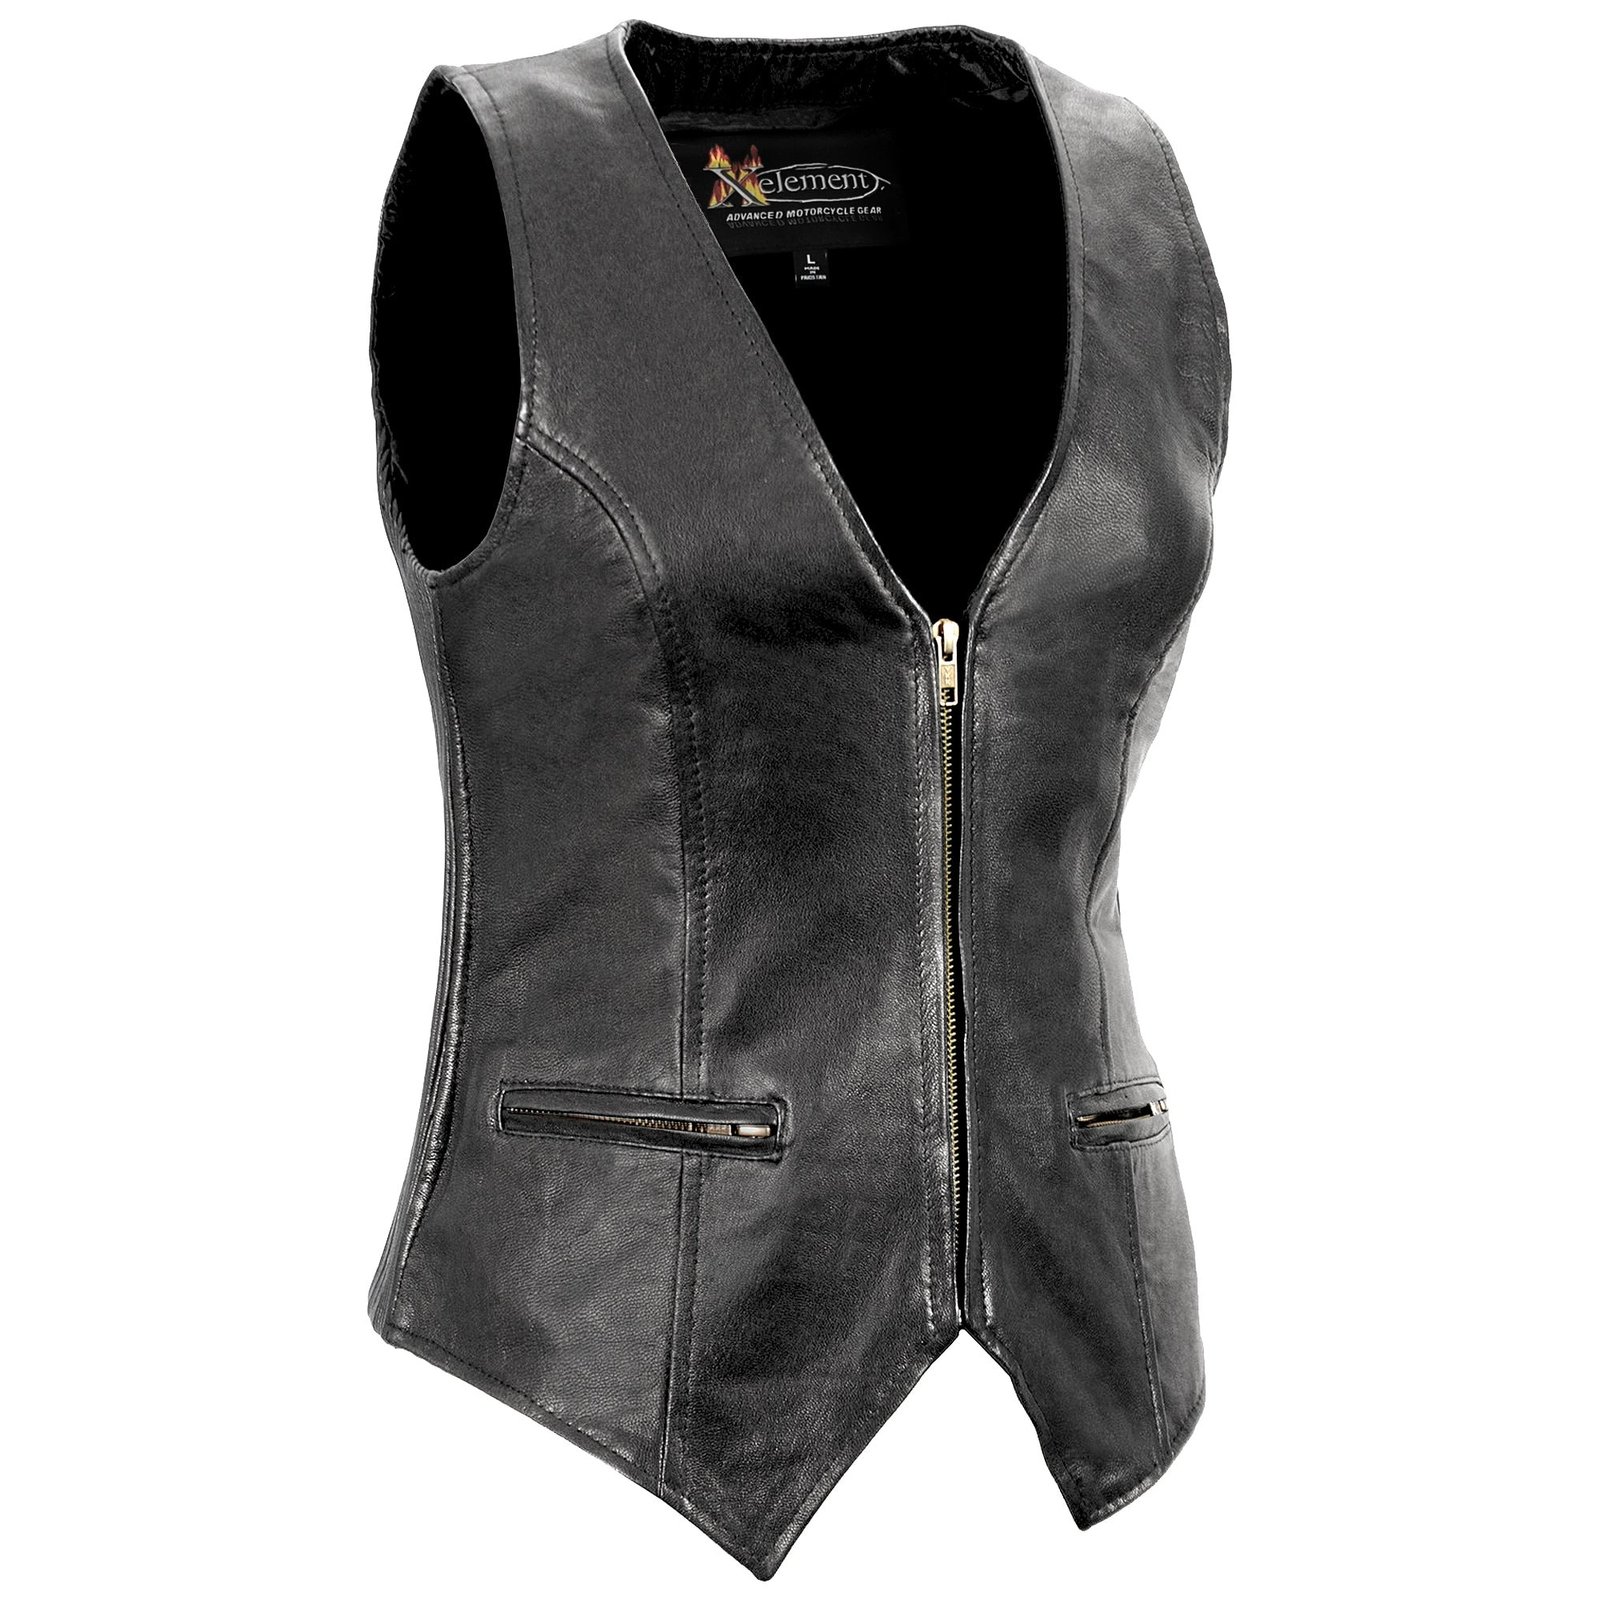 Empowerment and Style: Women’s Black Leather Biker Vest